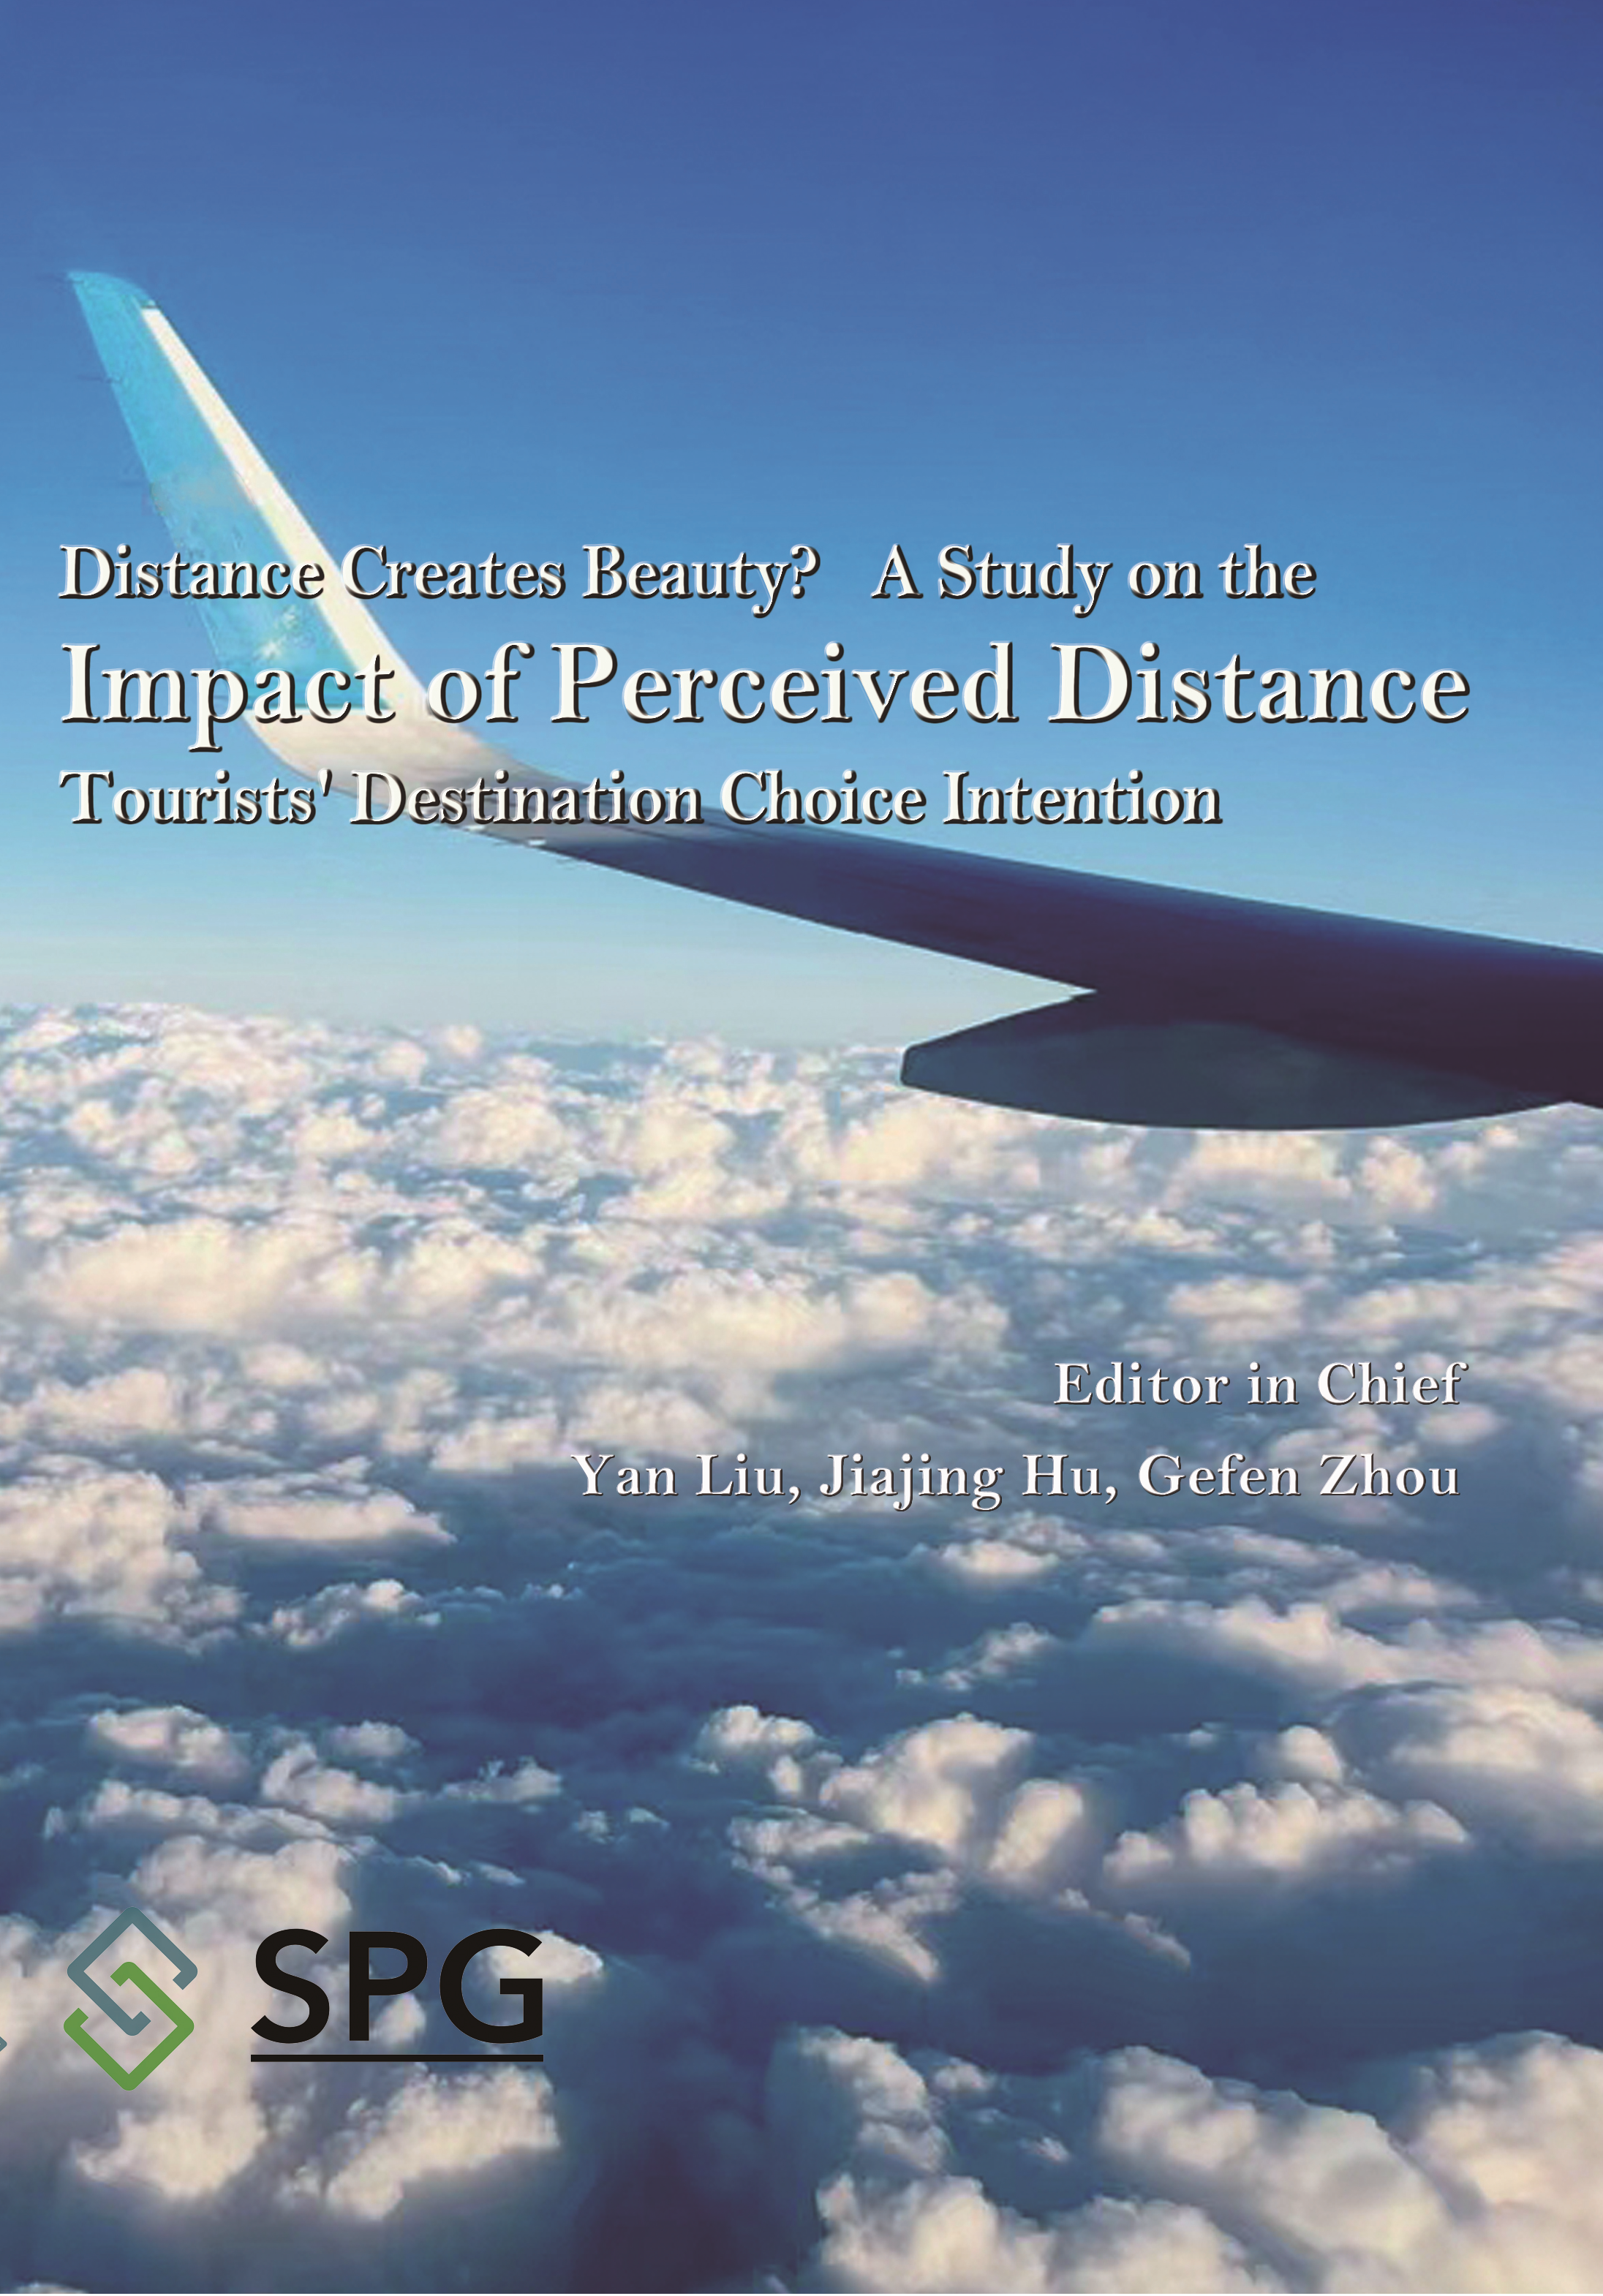 Distance Creates Beauty? The Impact of Perceived Distance on Tourists' Destination Choice Intention | Scholar Publishing Group